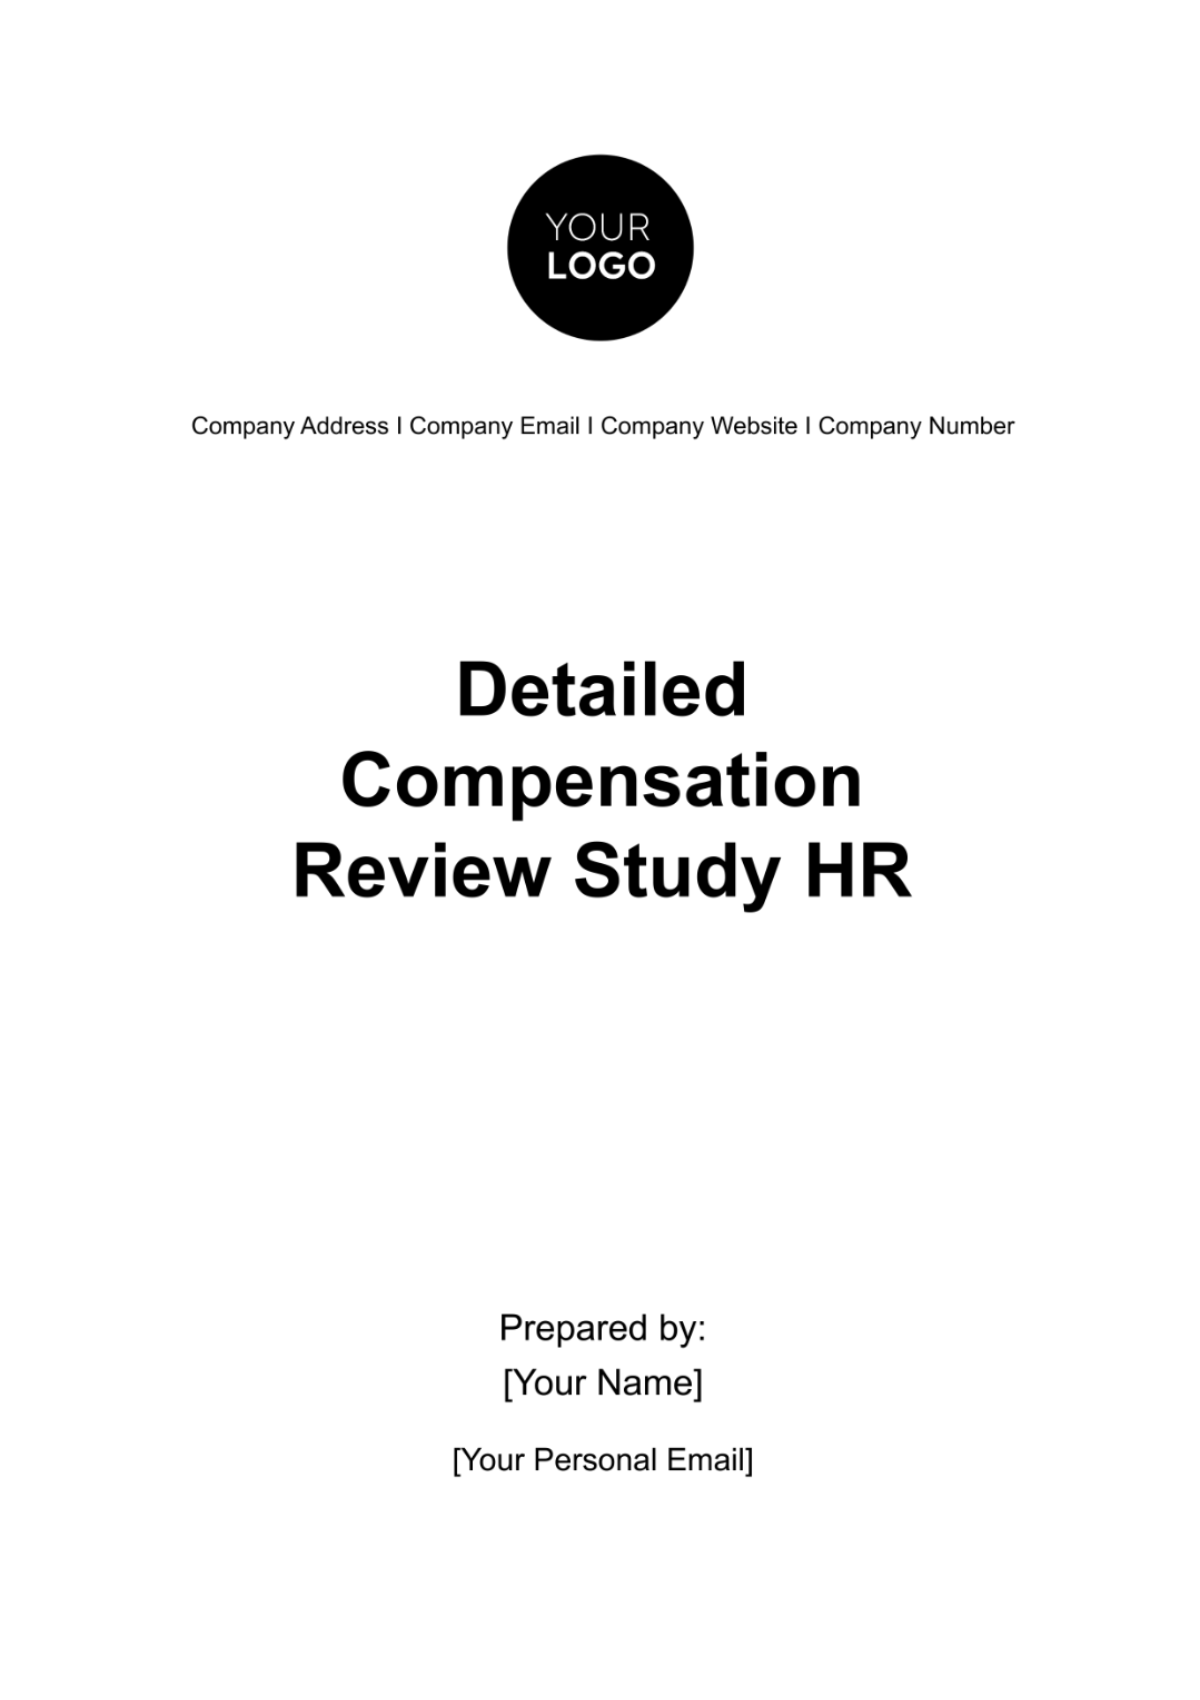 Detailed Compensation Review Study HR Template